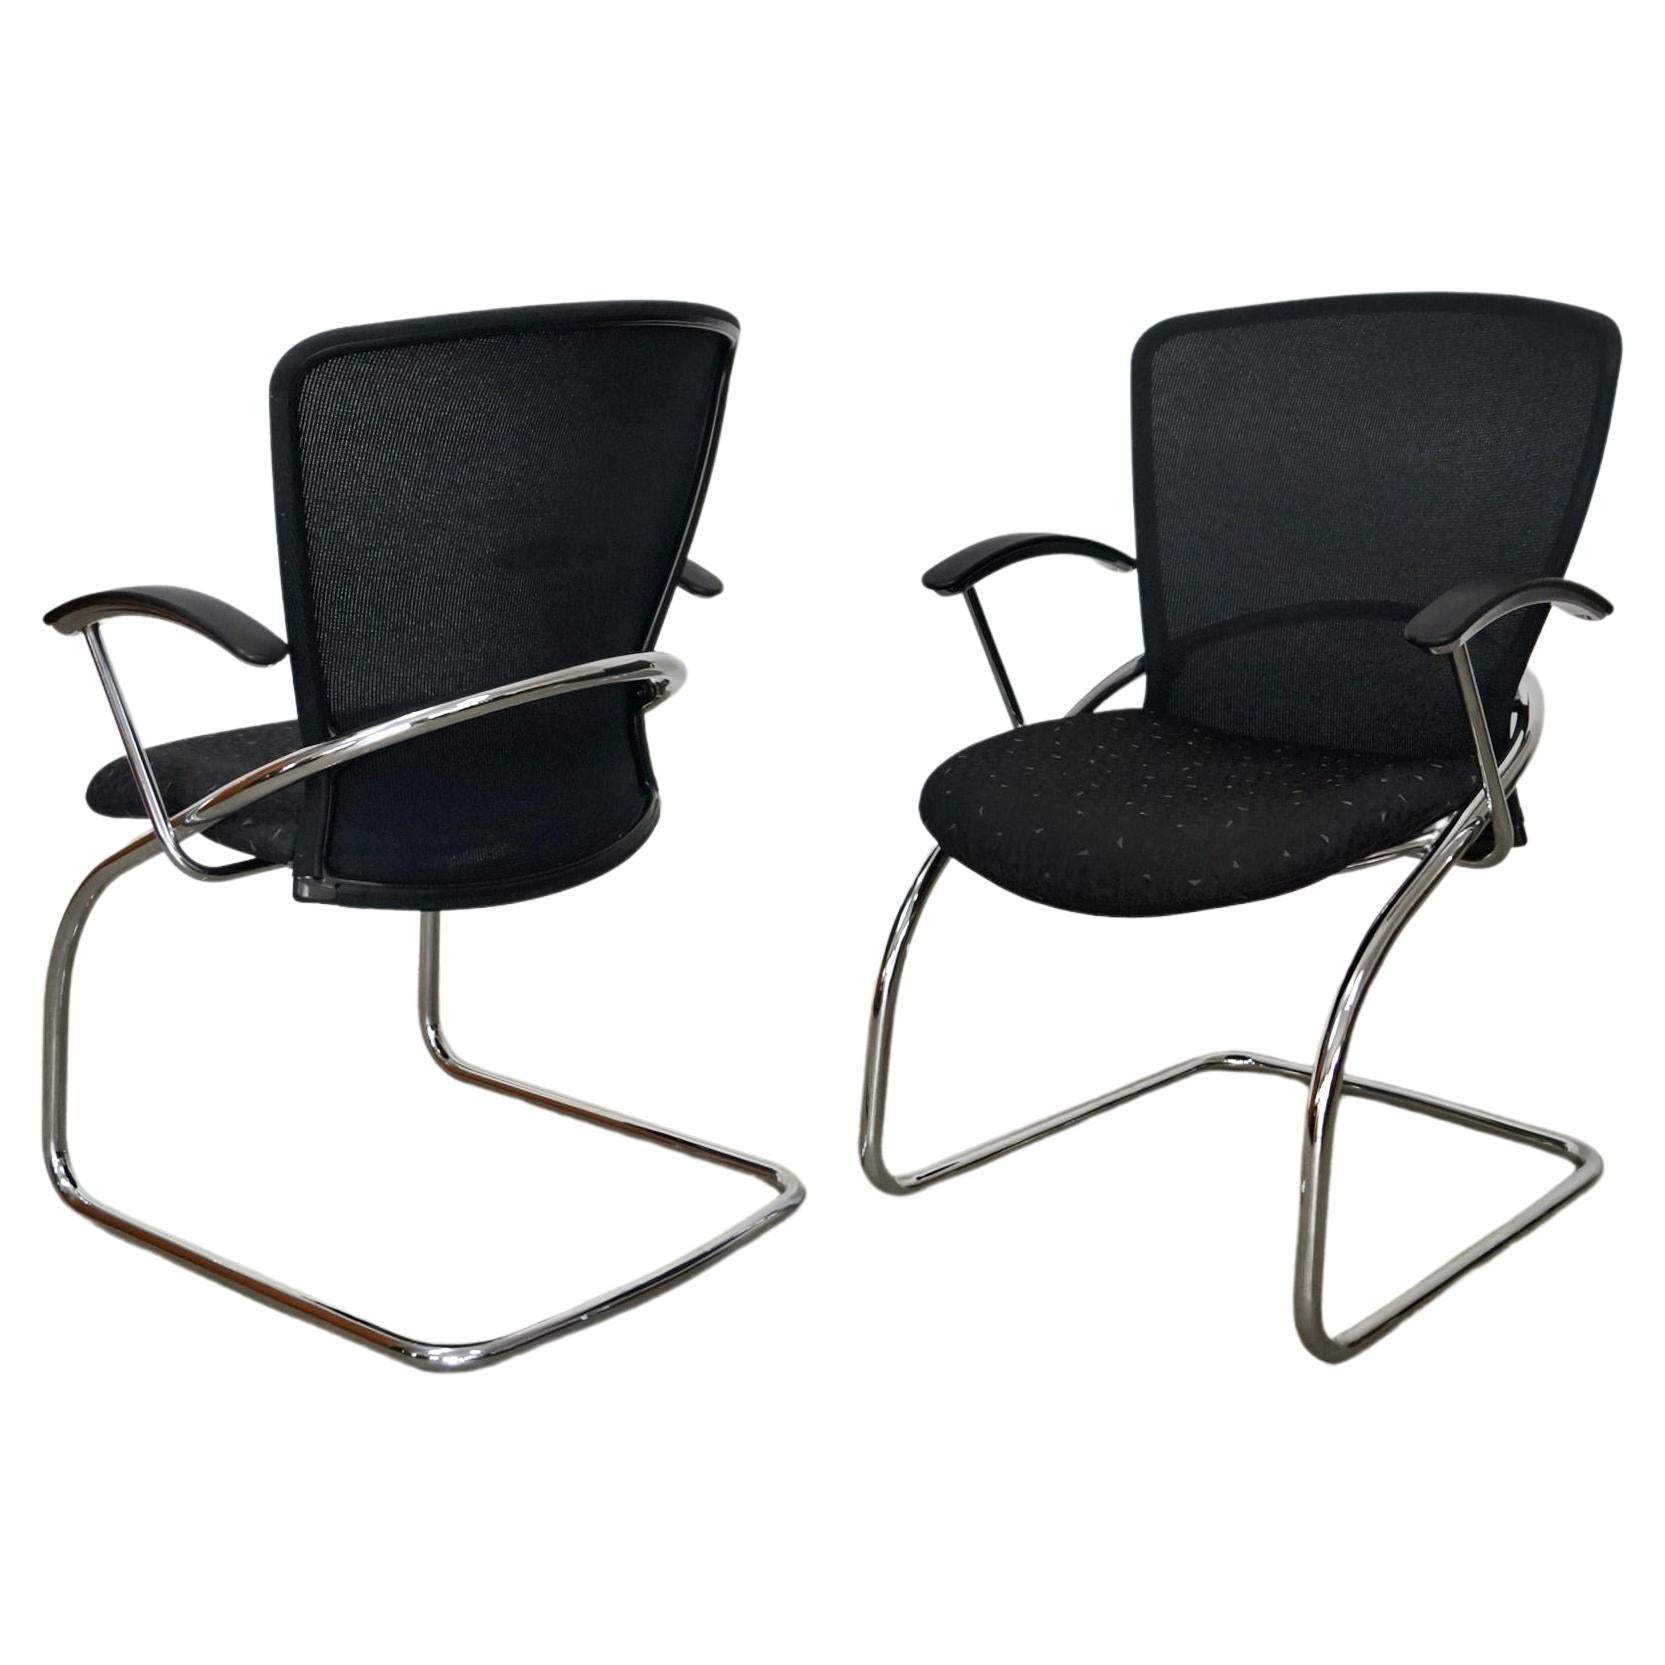 1990's Postmodern German Chrome Cantilever Arm Chairs - A Pair For Sale